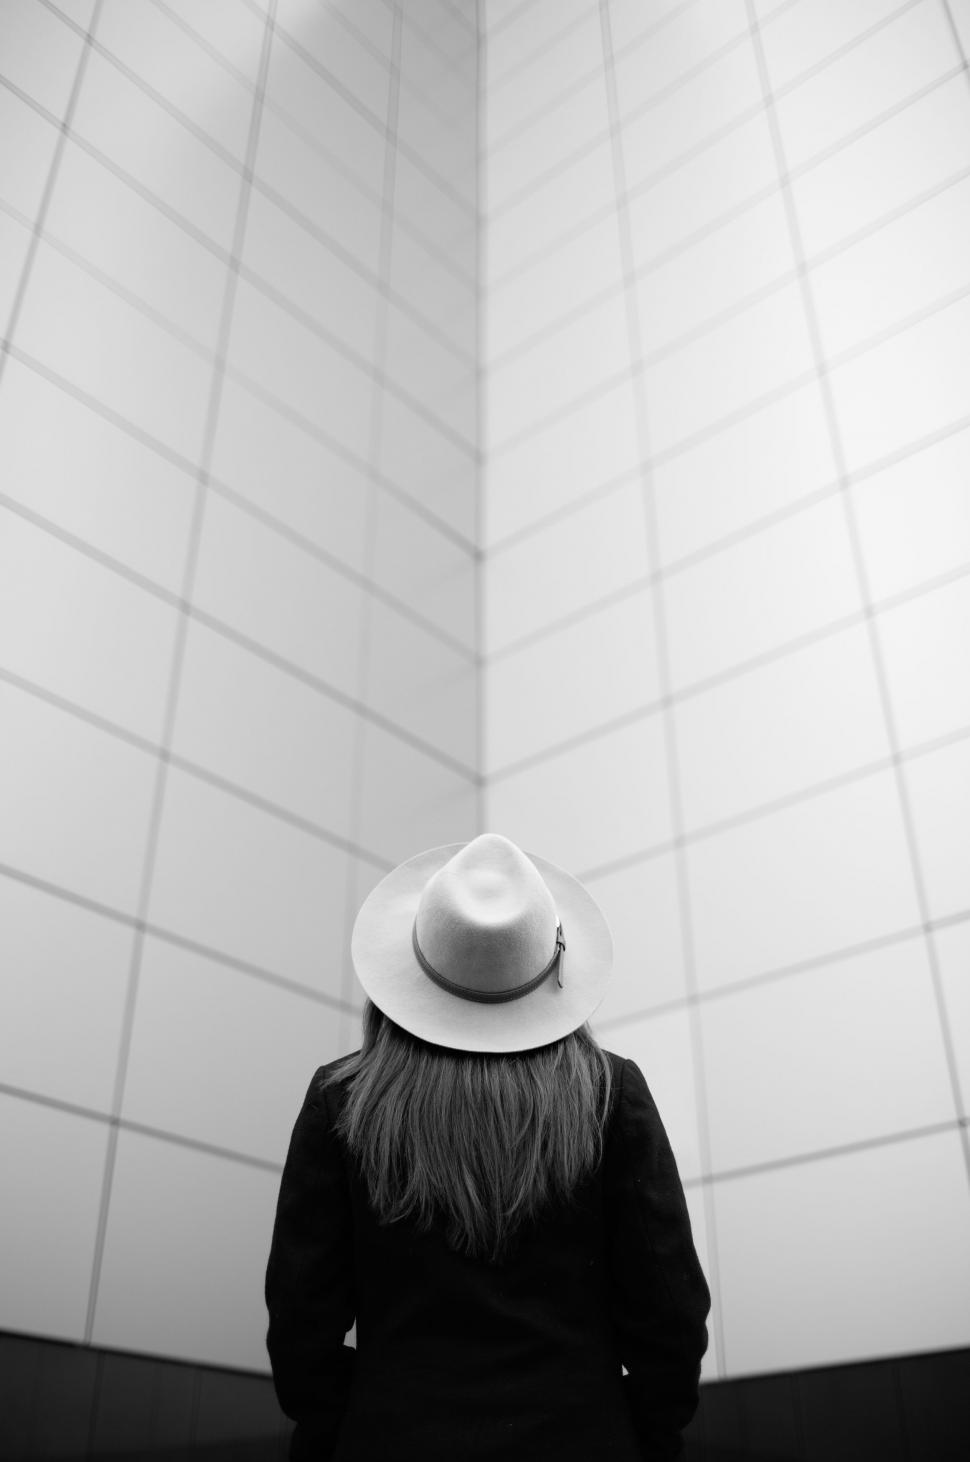 Free Image of Woman With Hat Standing in Front of Tiled Wall 